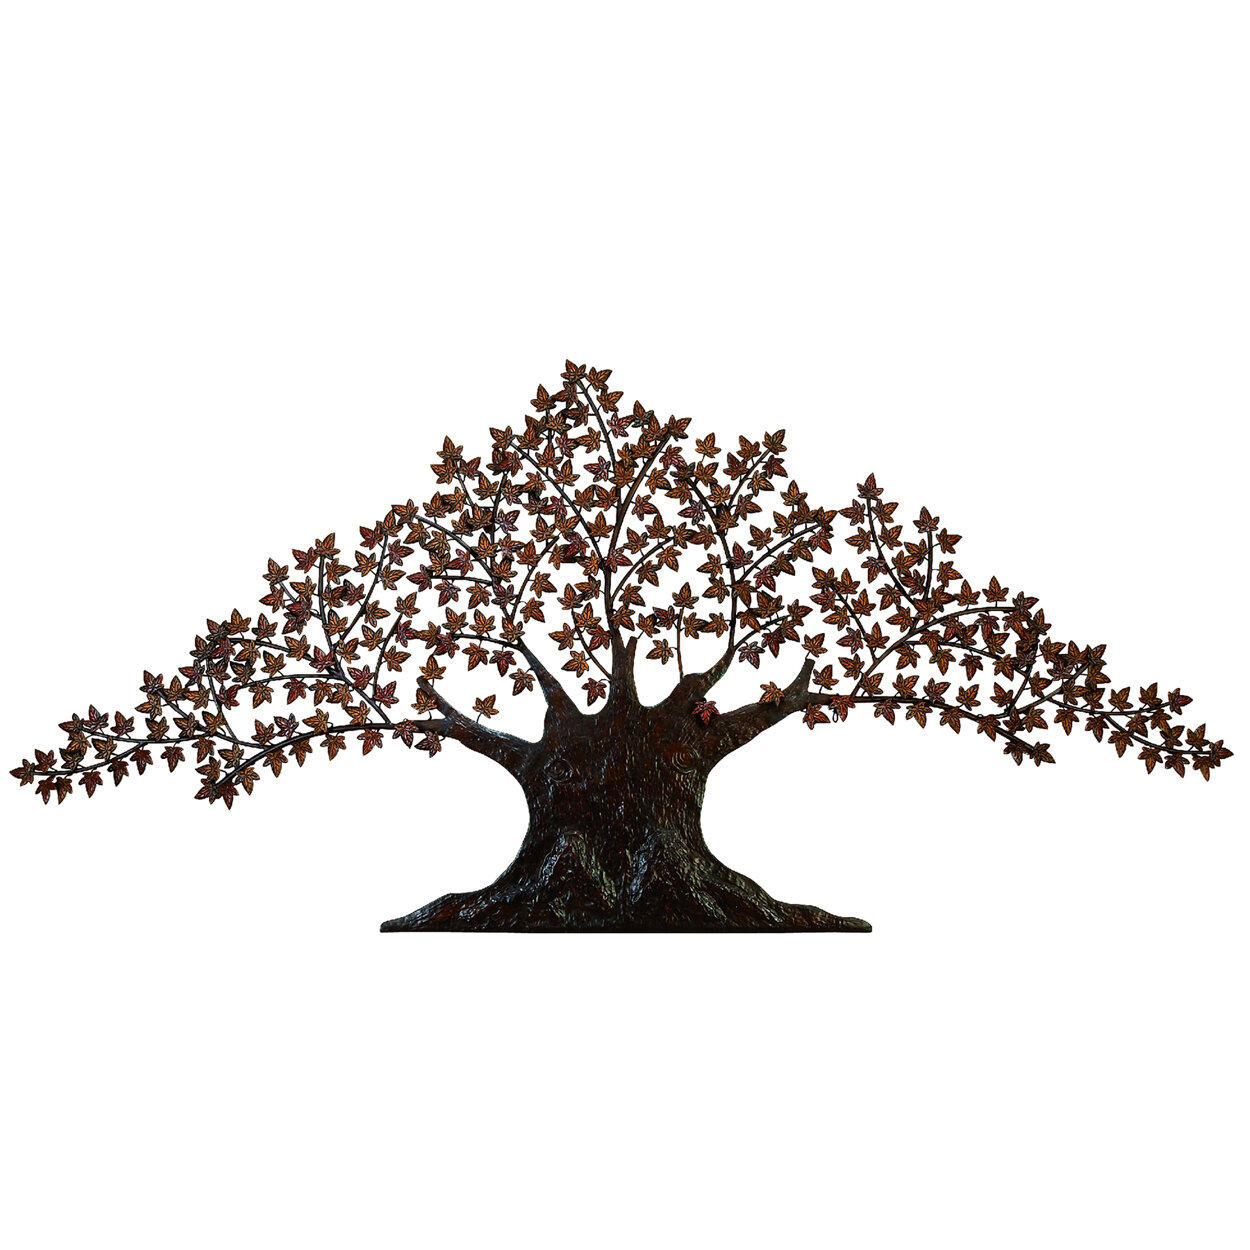 East Urban Home 92 Handcrafted Tree Of Life Large Metal Art Wall Decor Reviews Wayfair